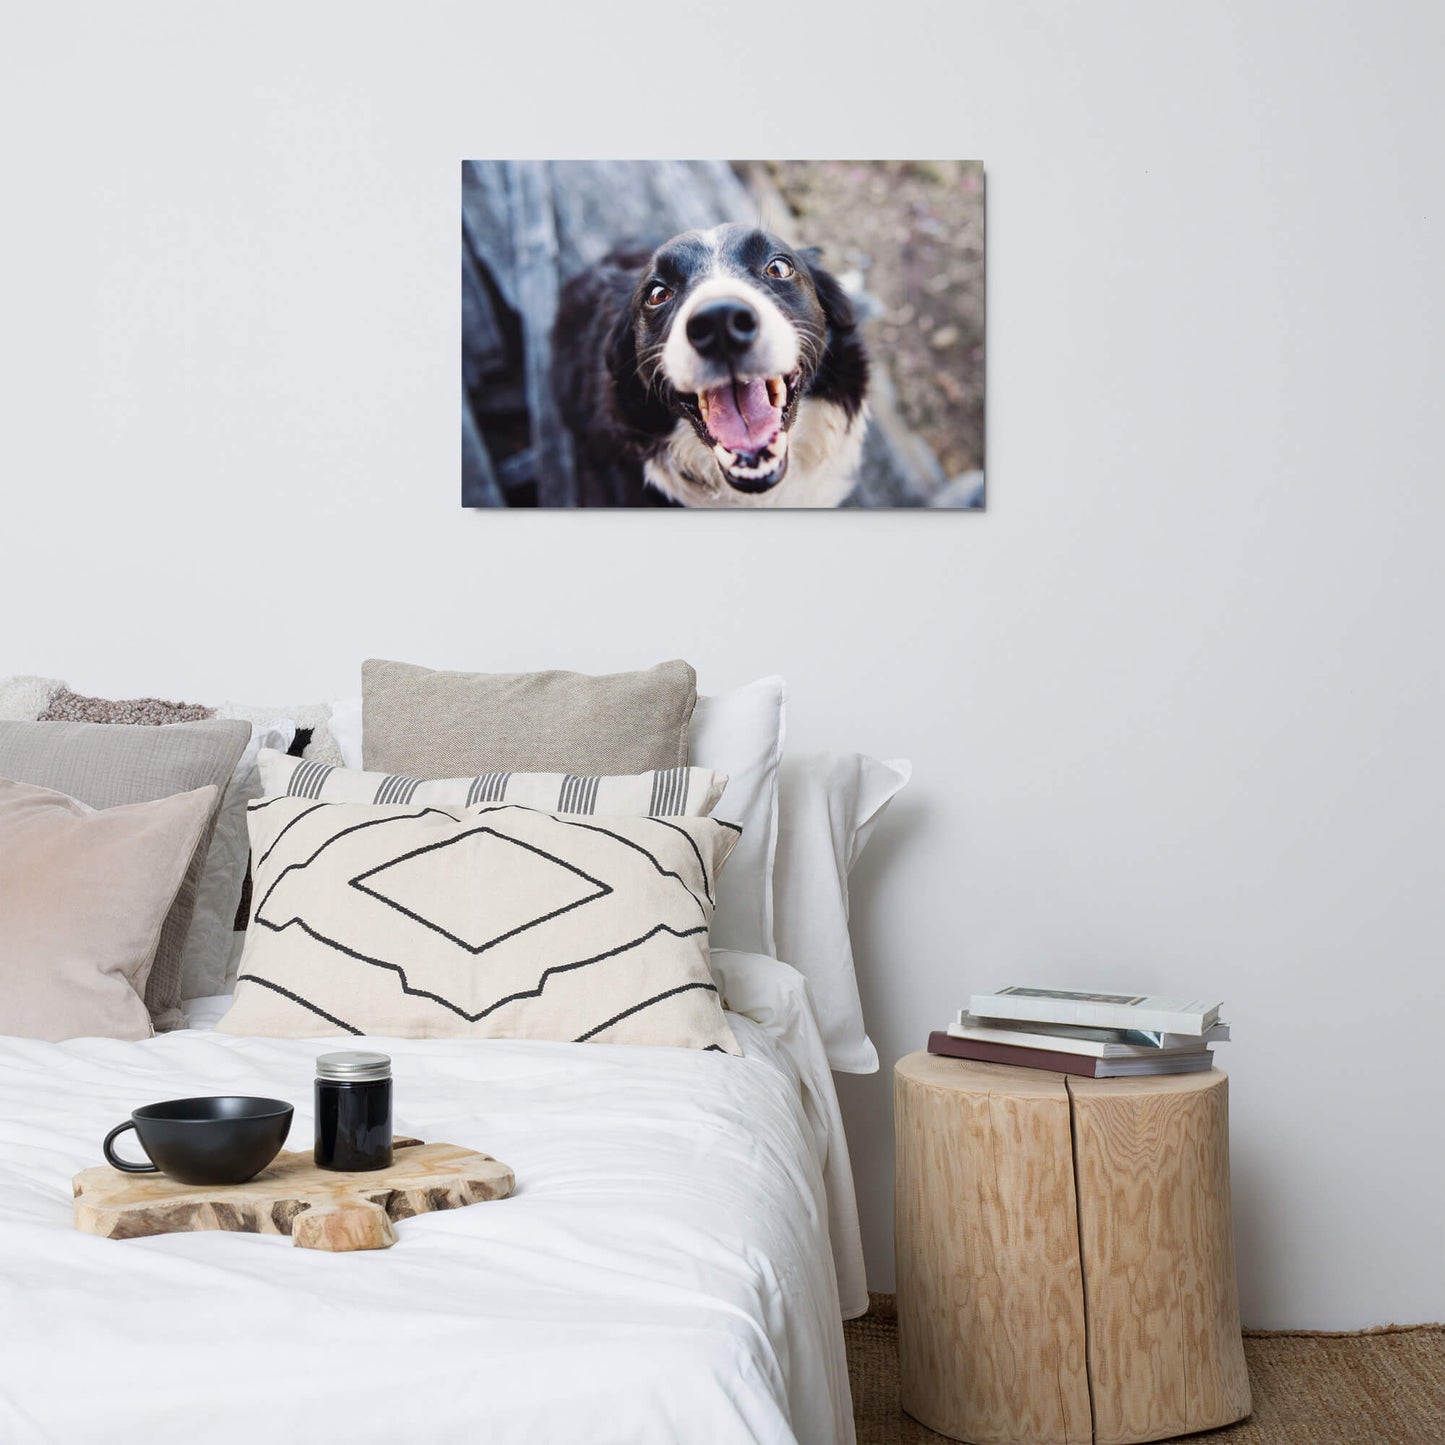 custom pet photo pillows and cushions, personalized pet-themed photo frames and albums, handcrafted pet accessories, pet-friendly home decorations, pet-themed jewelry and accessories, custom pet themed products, personalized pet gifts, dog lover gifts, cat lover gifts, custom pet portraits, pet lover home decor